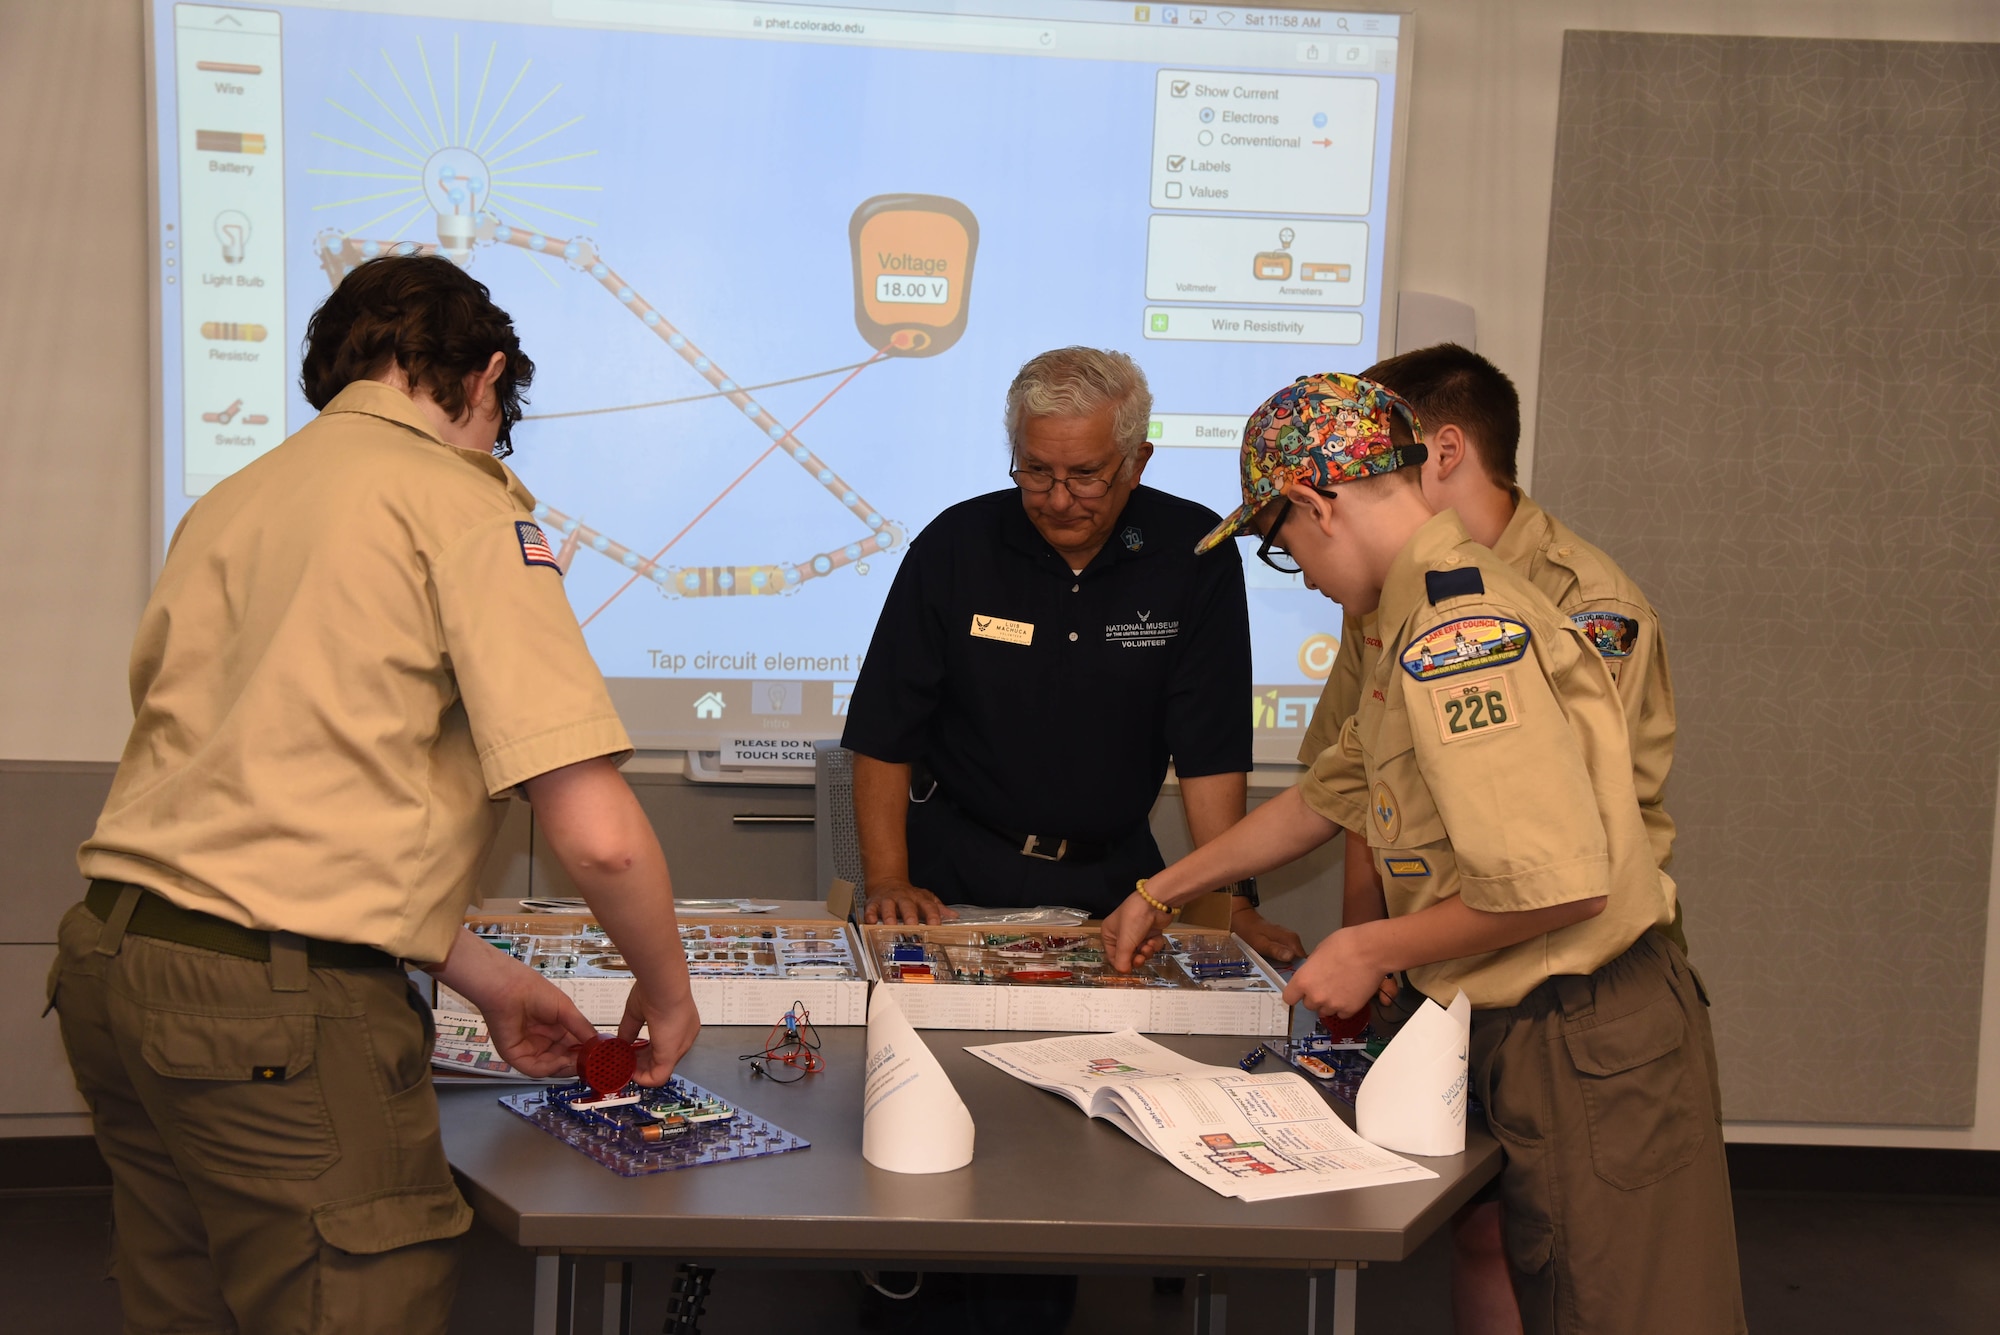 Museum visitors take part in educational opportunities during the Memphis Belle exhibit opening events May 17-19, 2018. (U.S. Air Force photo by Ken LaRock)